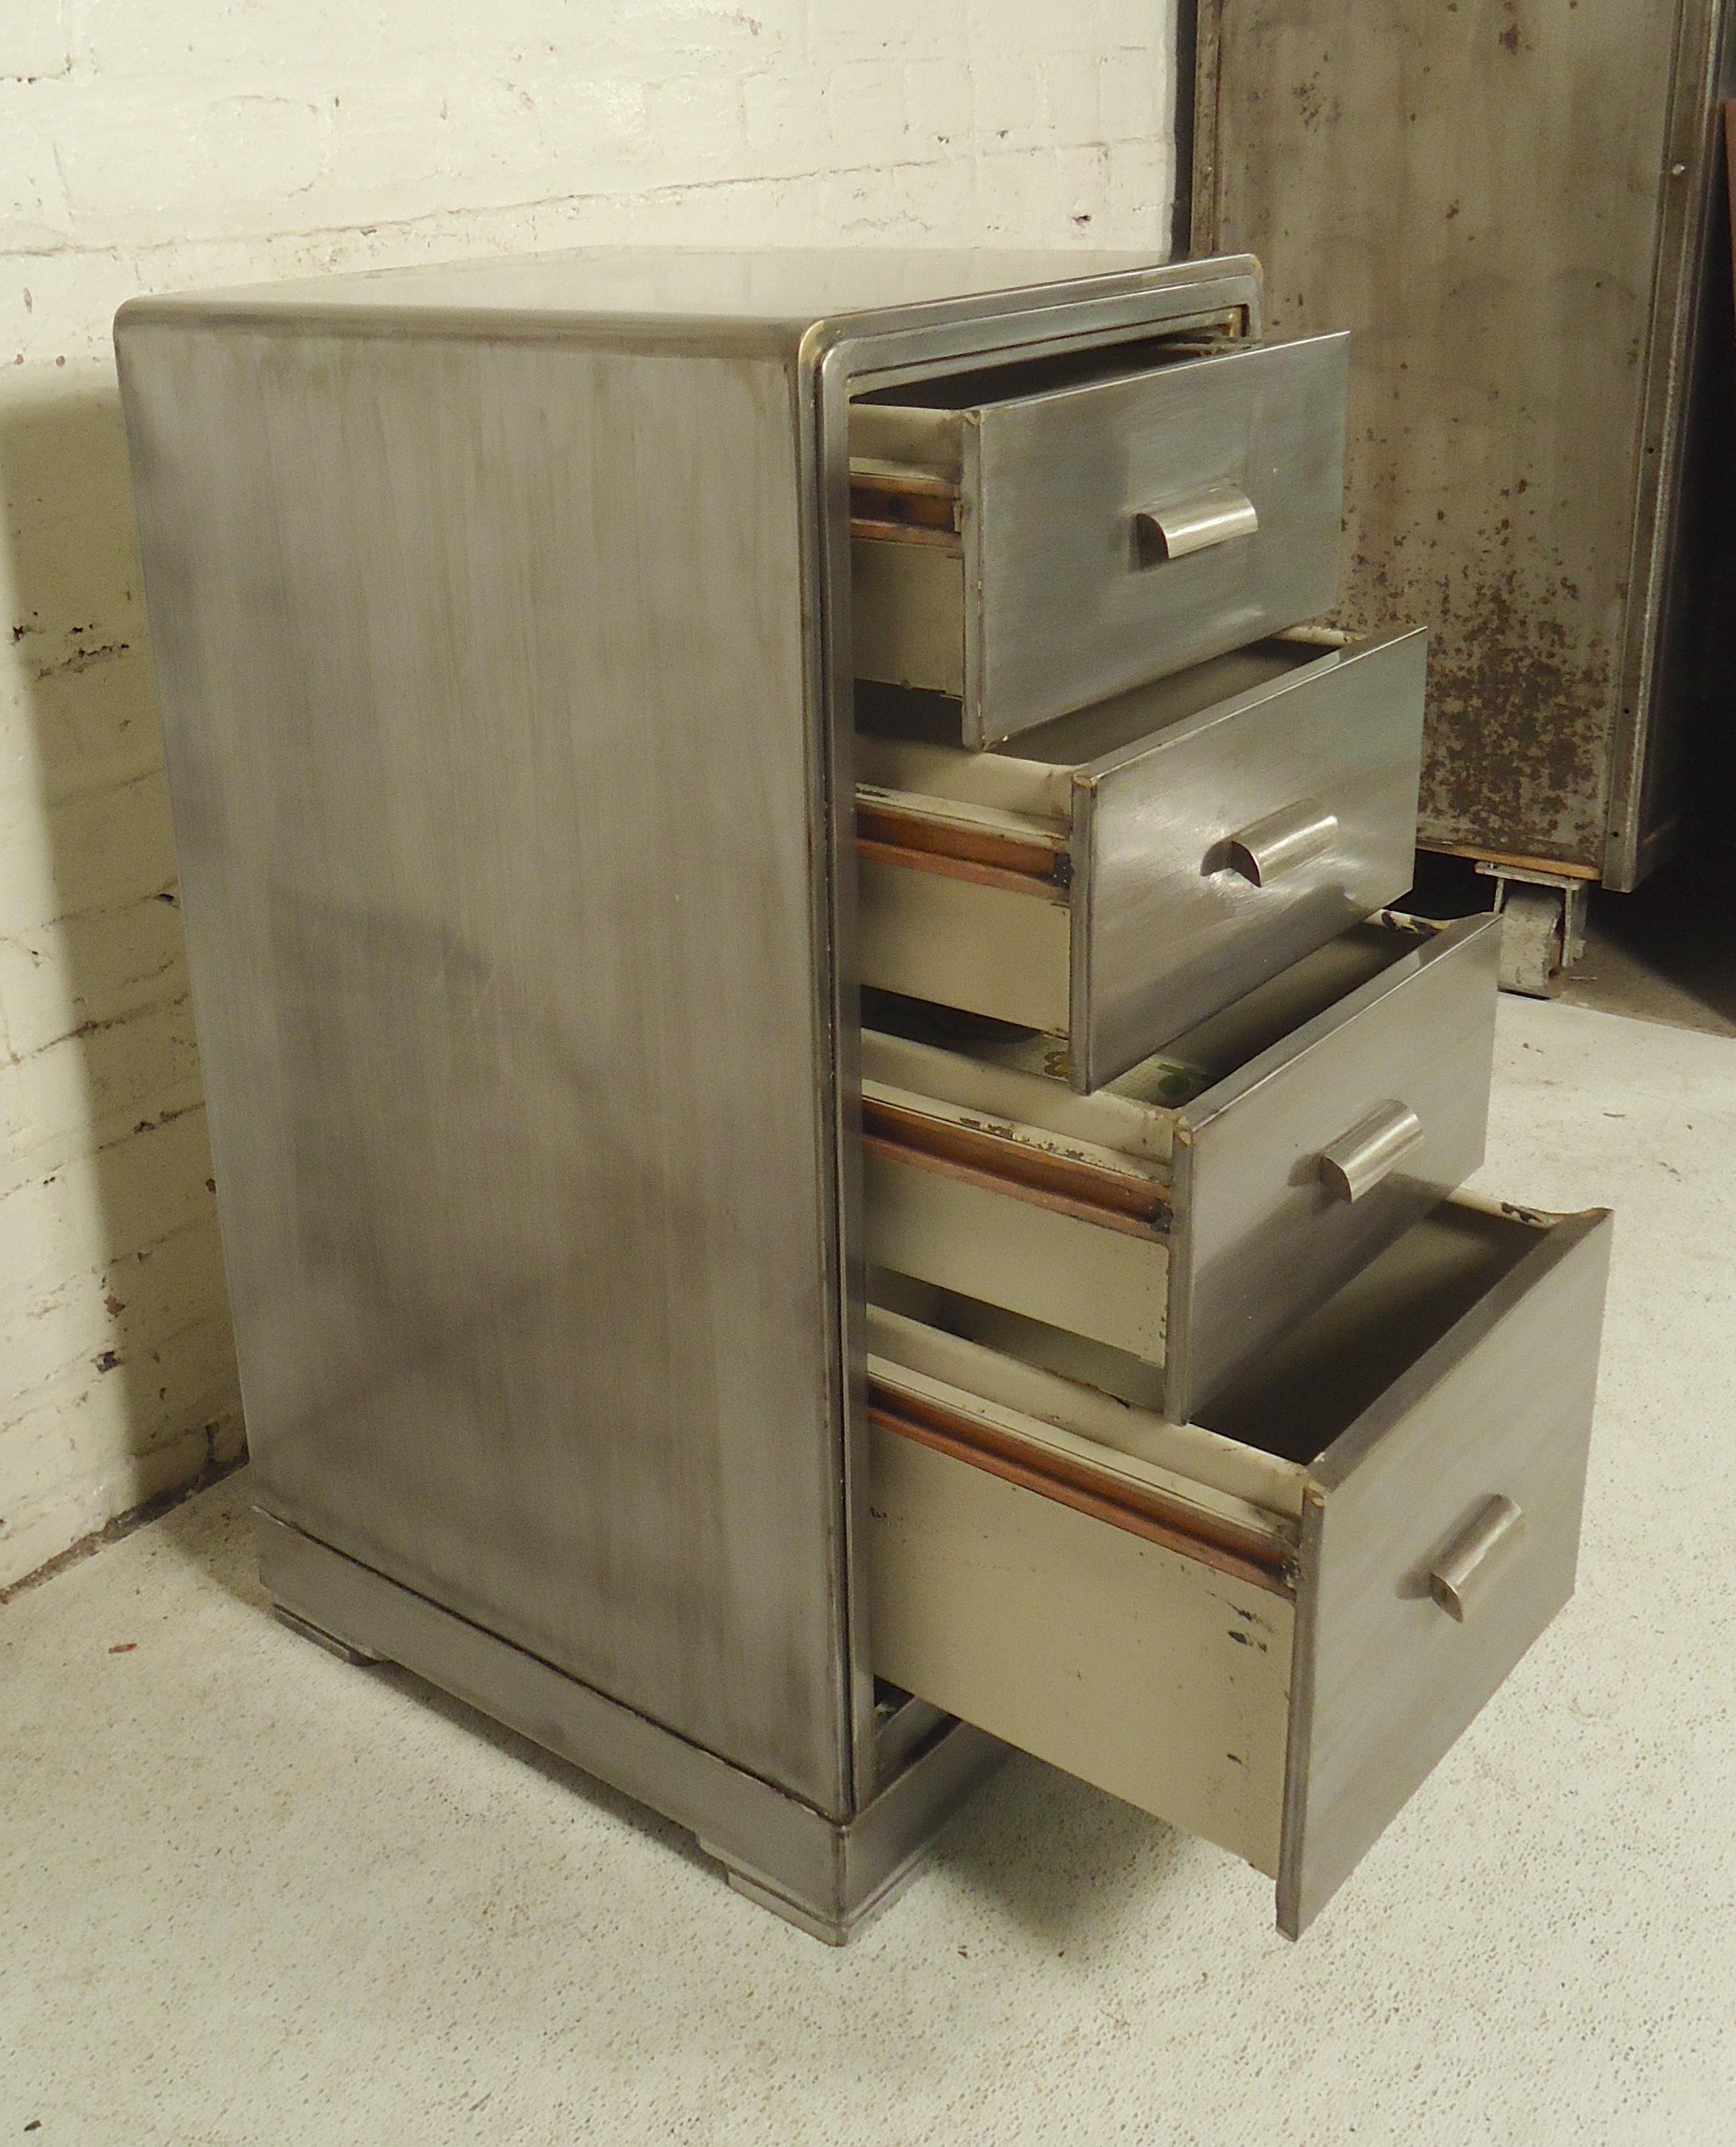 Simmons miniature set of drawers restored in a bare metal style finish.

(Please confirm item location - NY or NJ - with dealer).
  